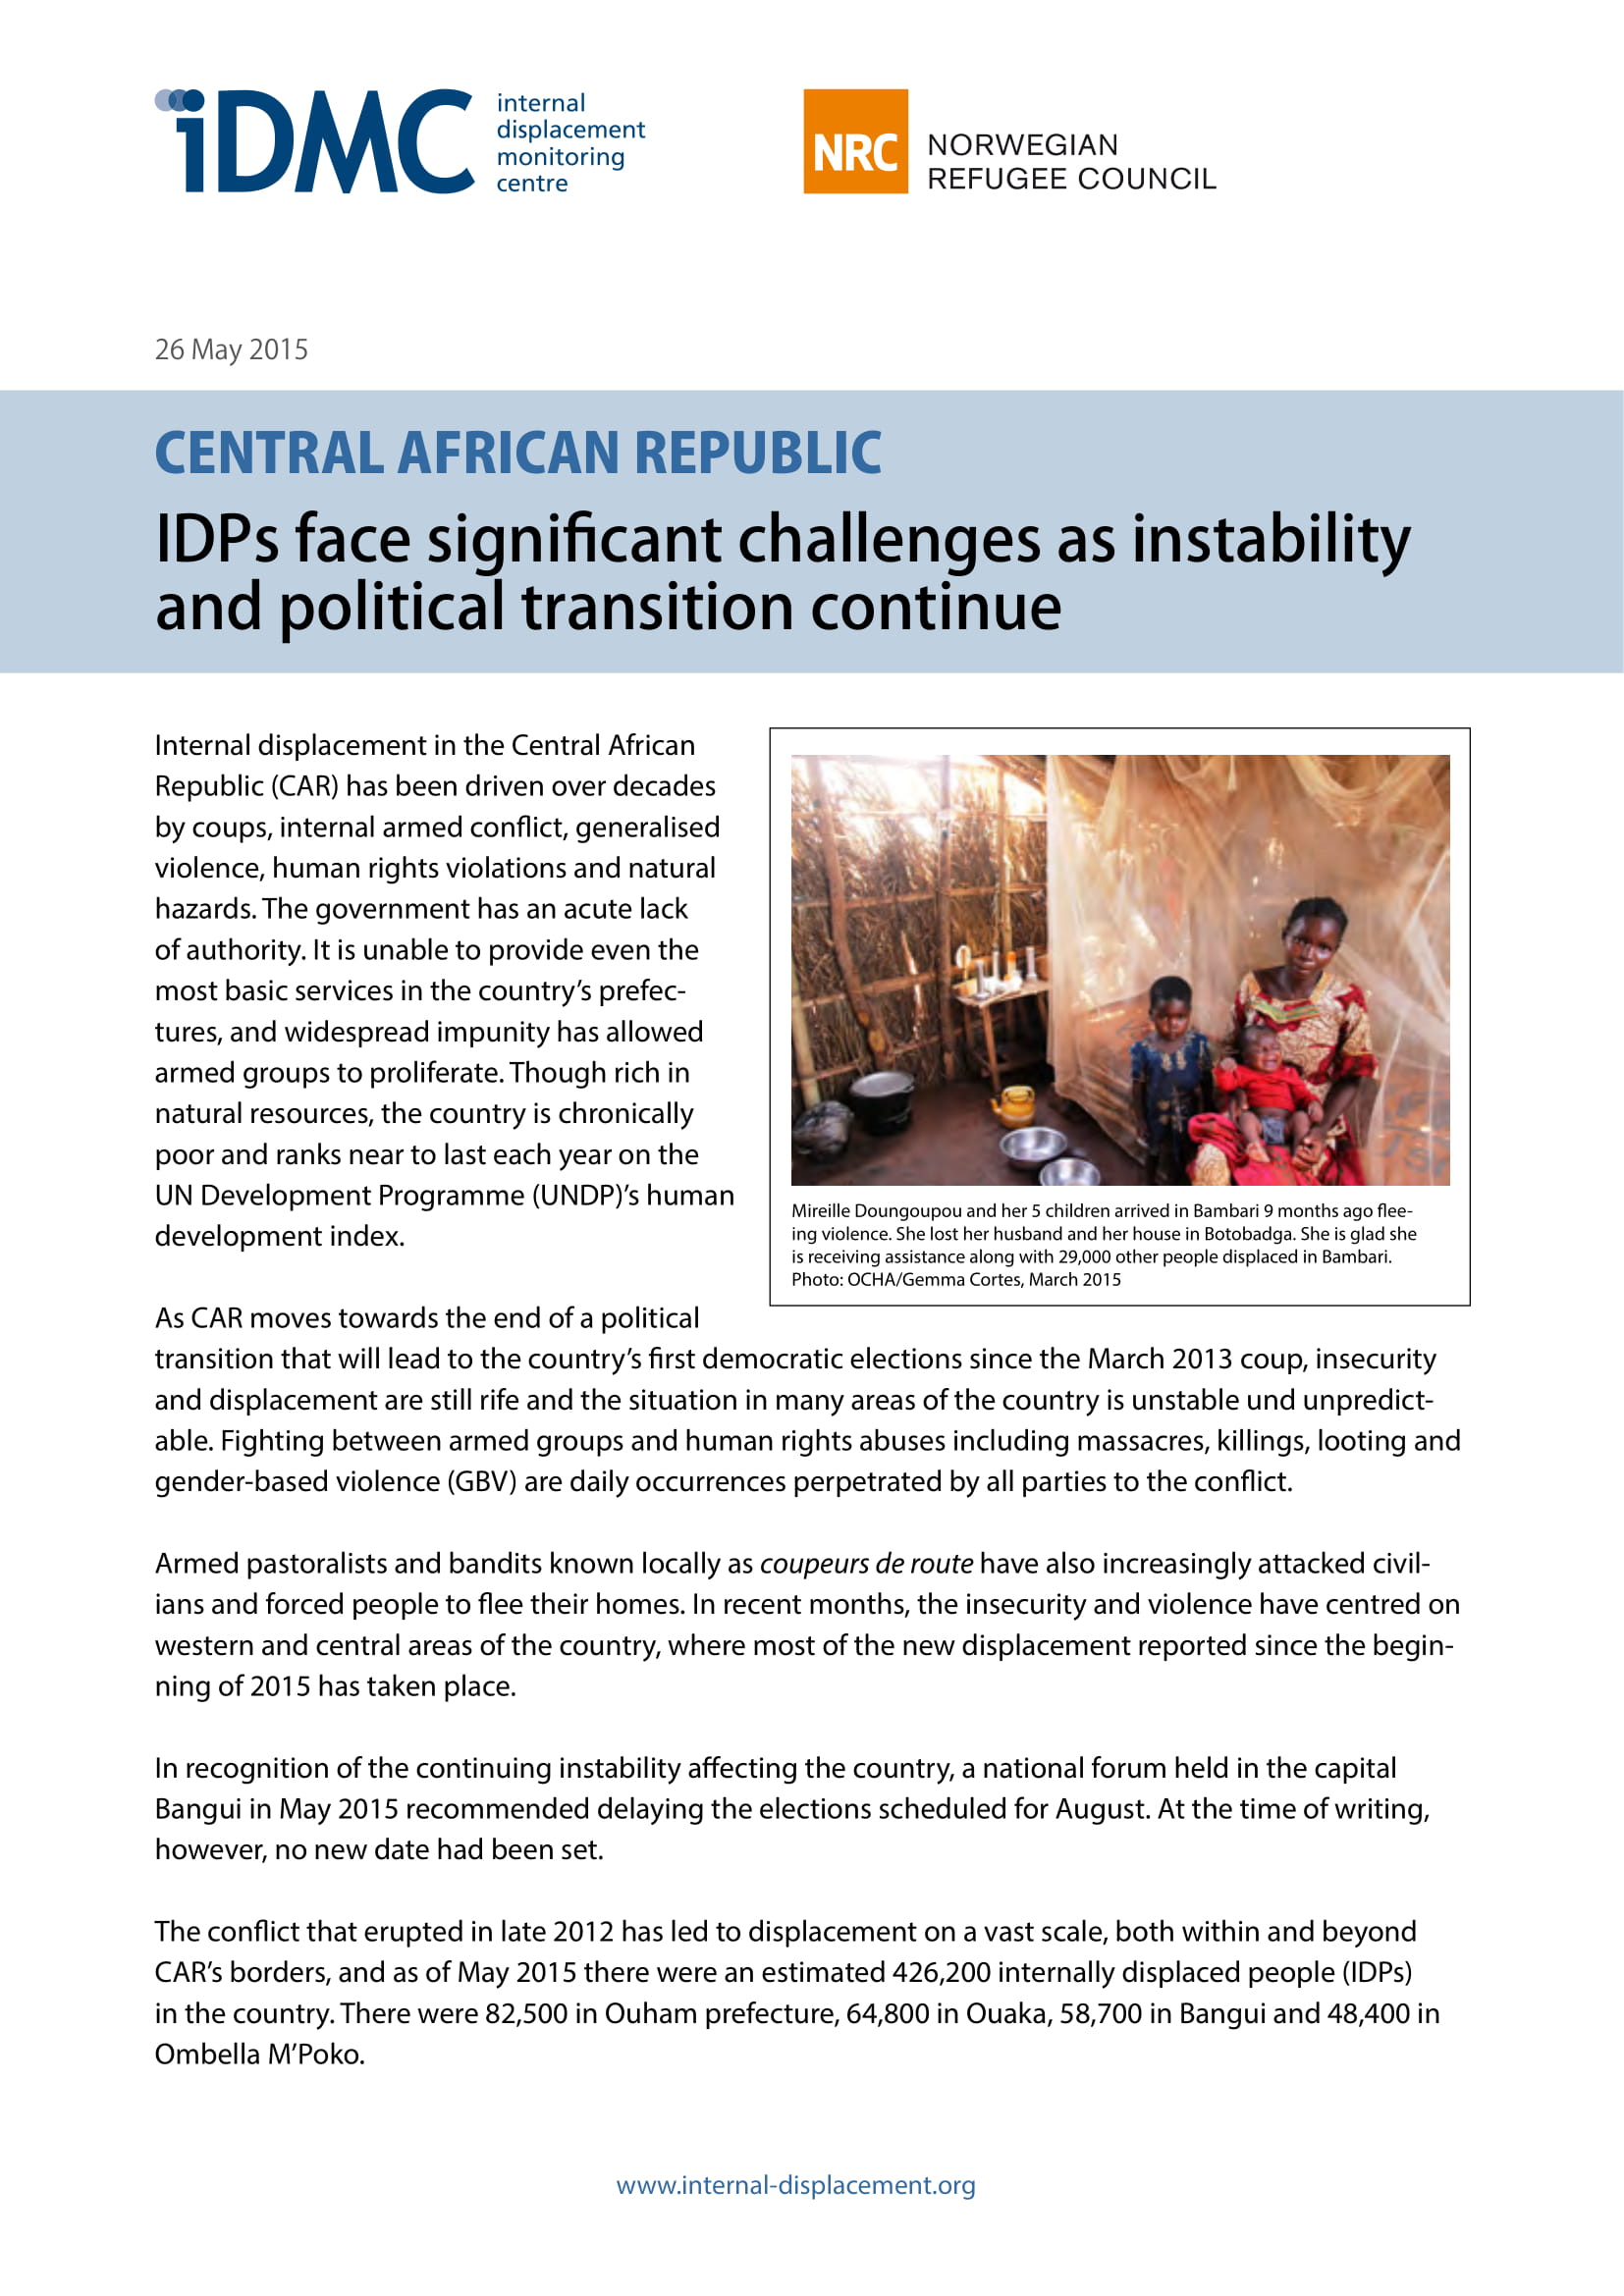 Central African Republic: IDPs face significant challenges as instability and political transition continue